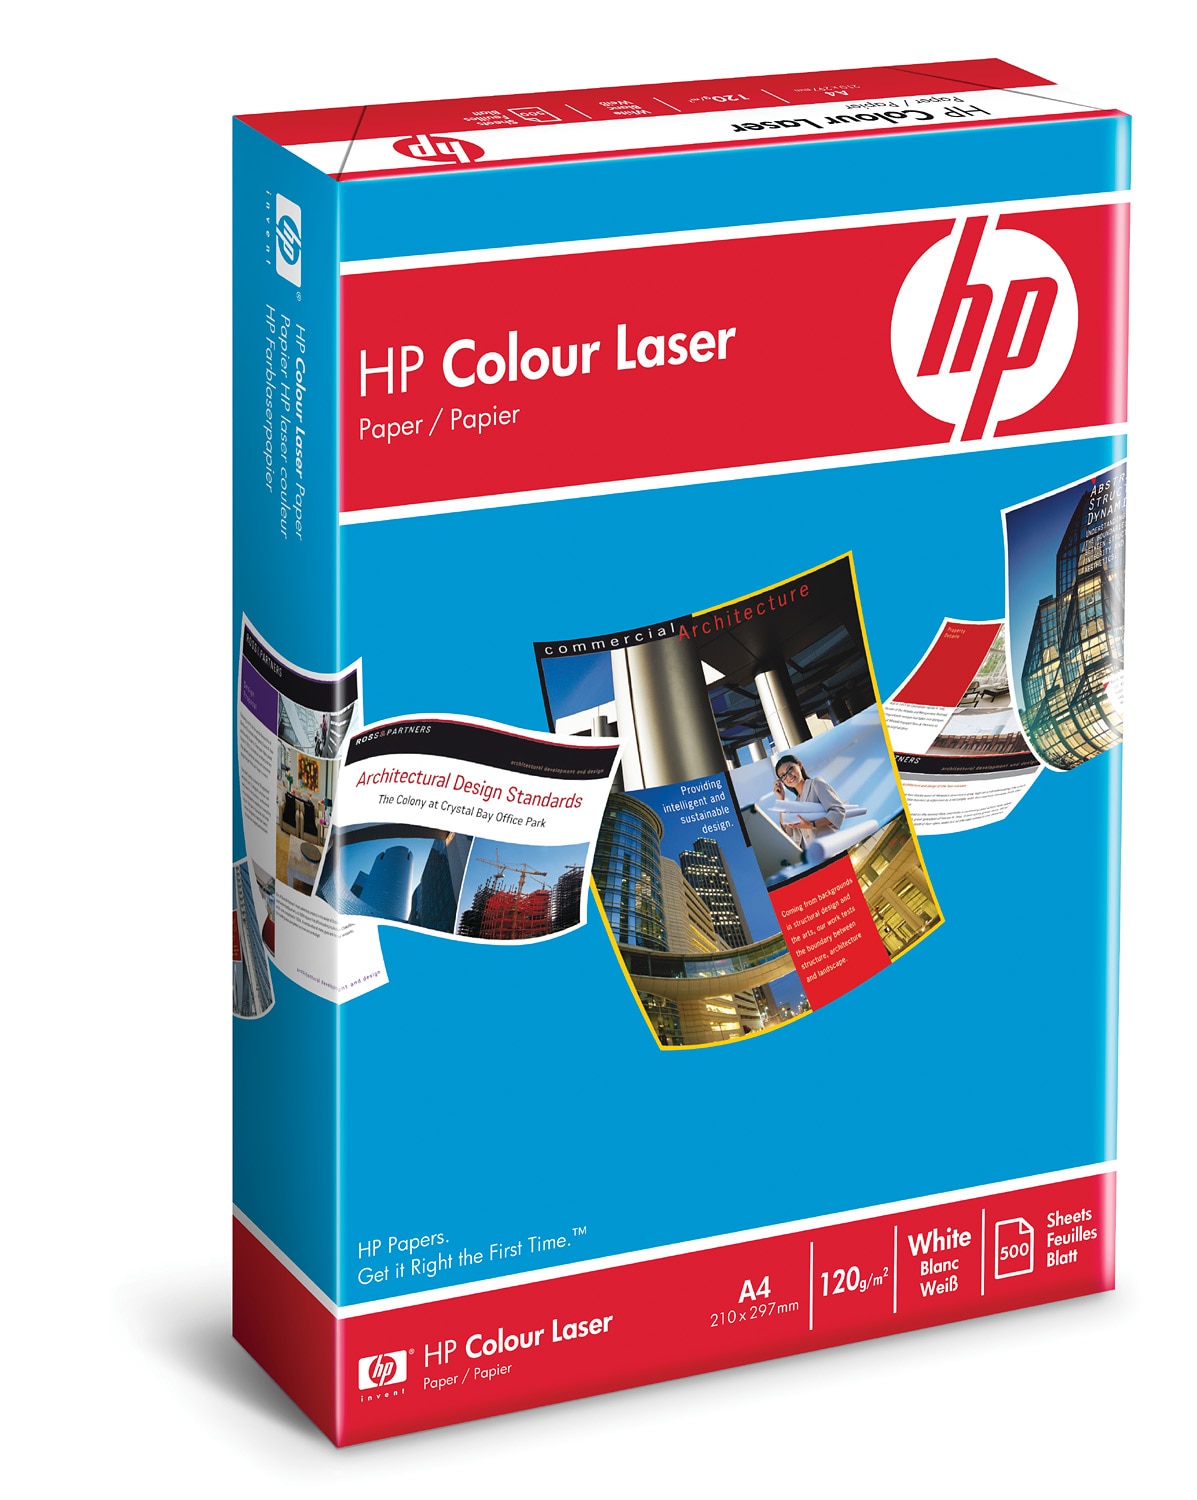 HP Color Laser Paper 120 gsm-250 sht/A4/210 x 297 mm | HP® Africa